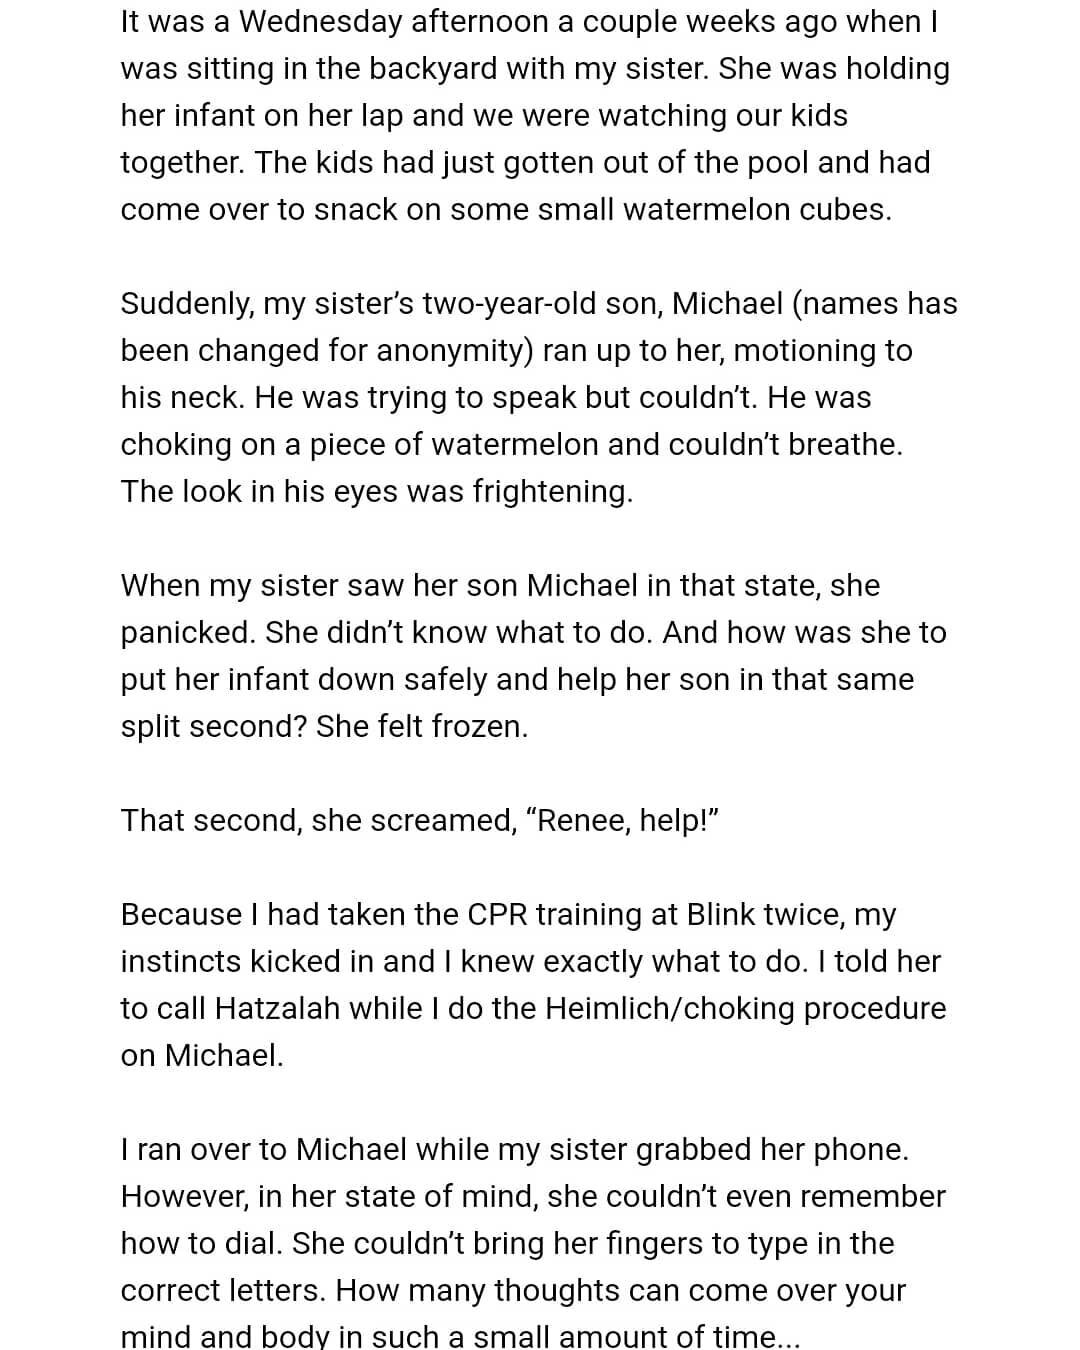 Incredible. #speechless
Be sure to swipe right for the 2nd part of the story.